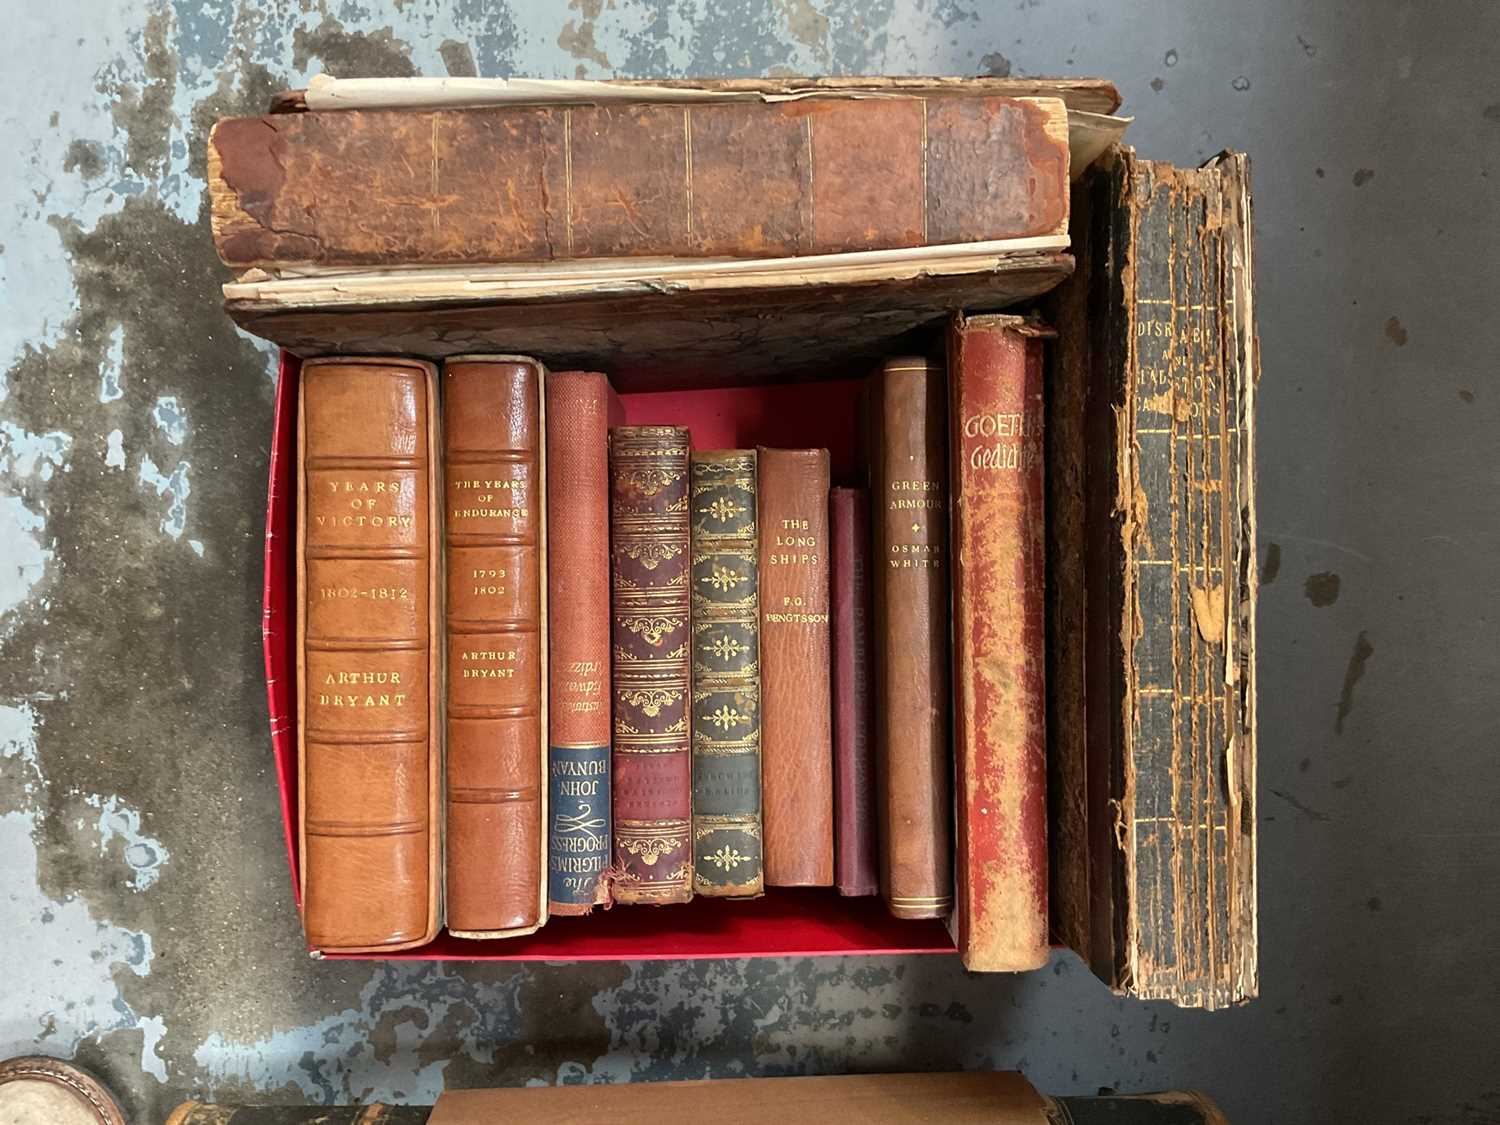 Group of antiquarian and other books, including two leather bound volumes of Arthur Bryant in slip c